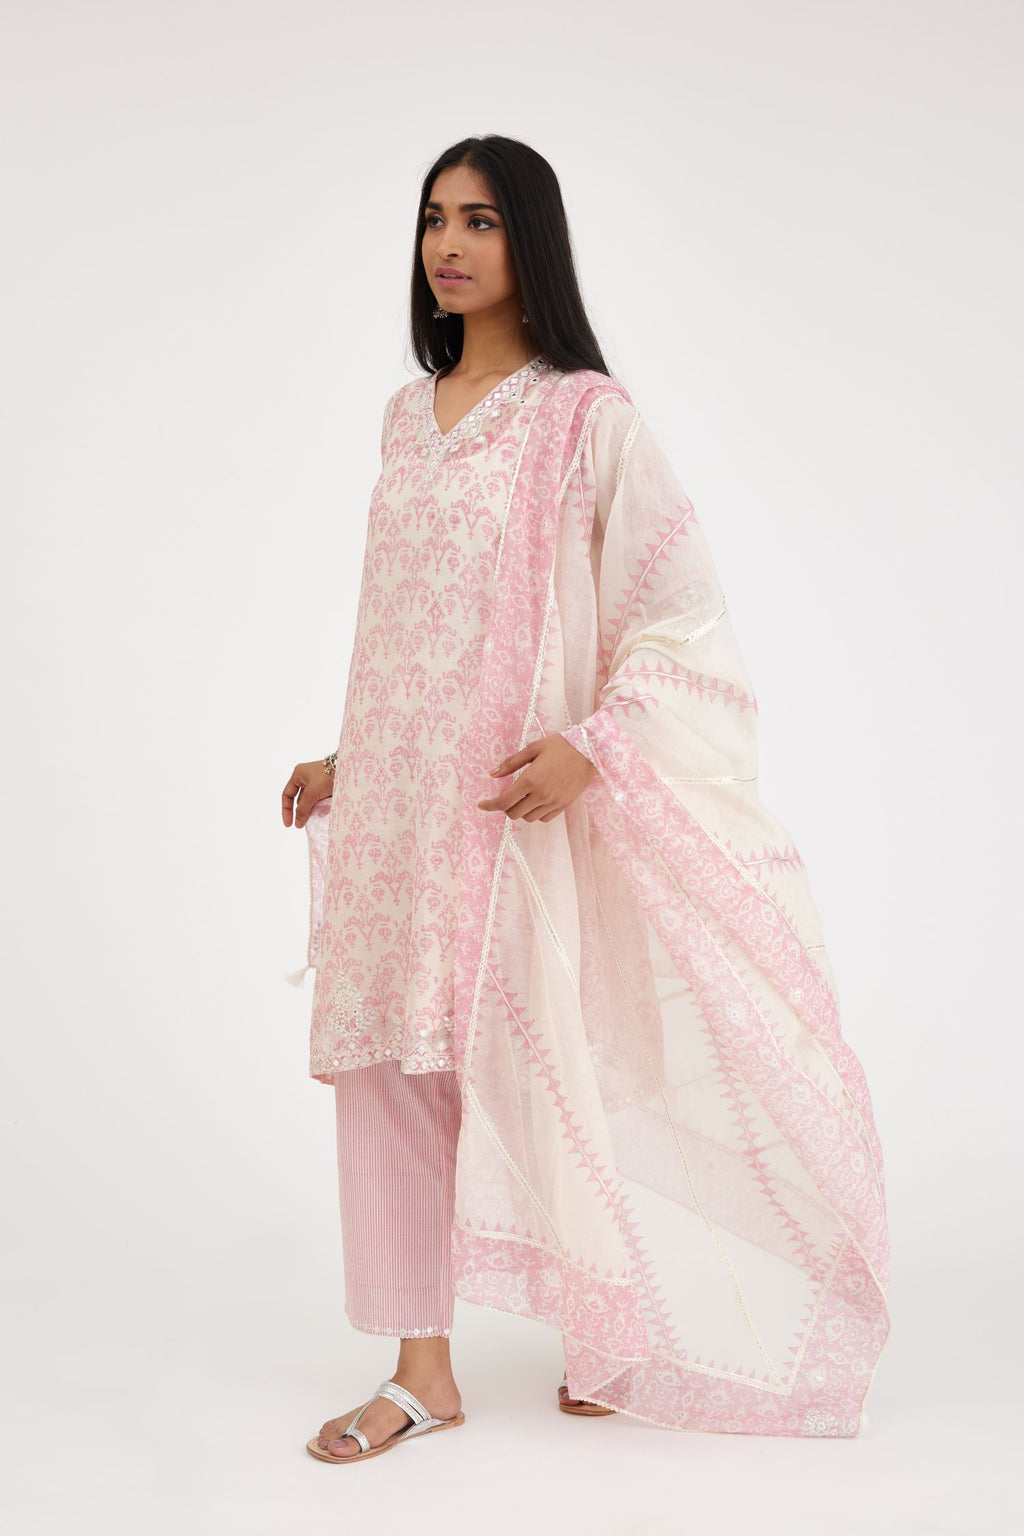 Cotton Chanderi Ikat hand-block printed Dupatta with border and alternating diagonal stripes in print and silver gota.